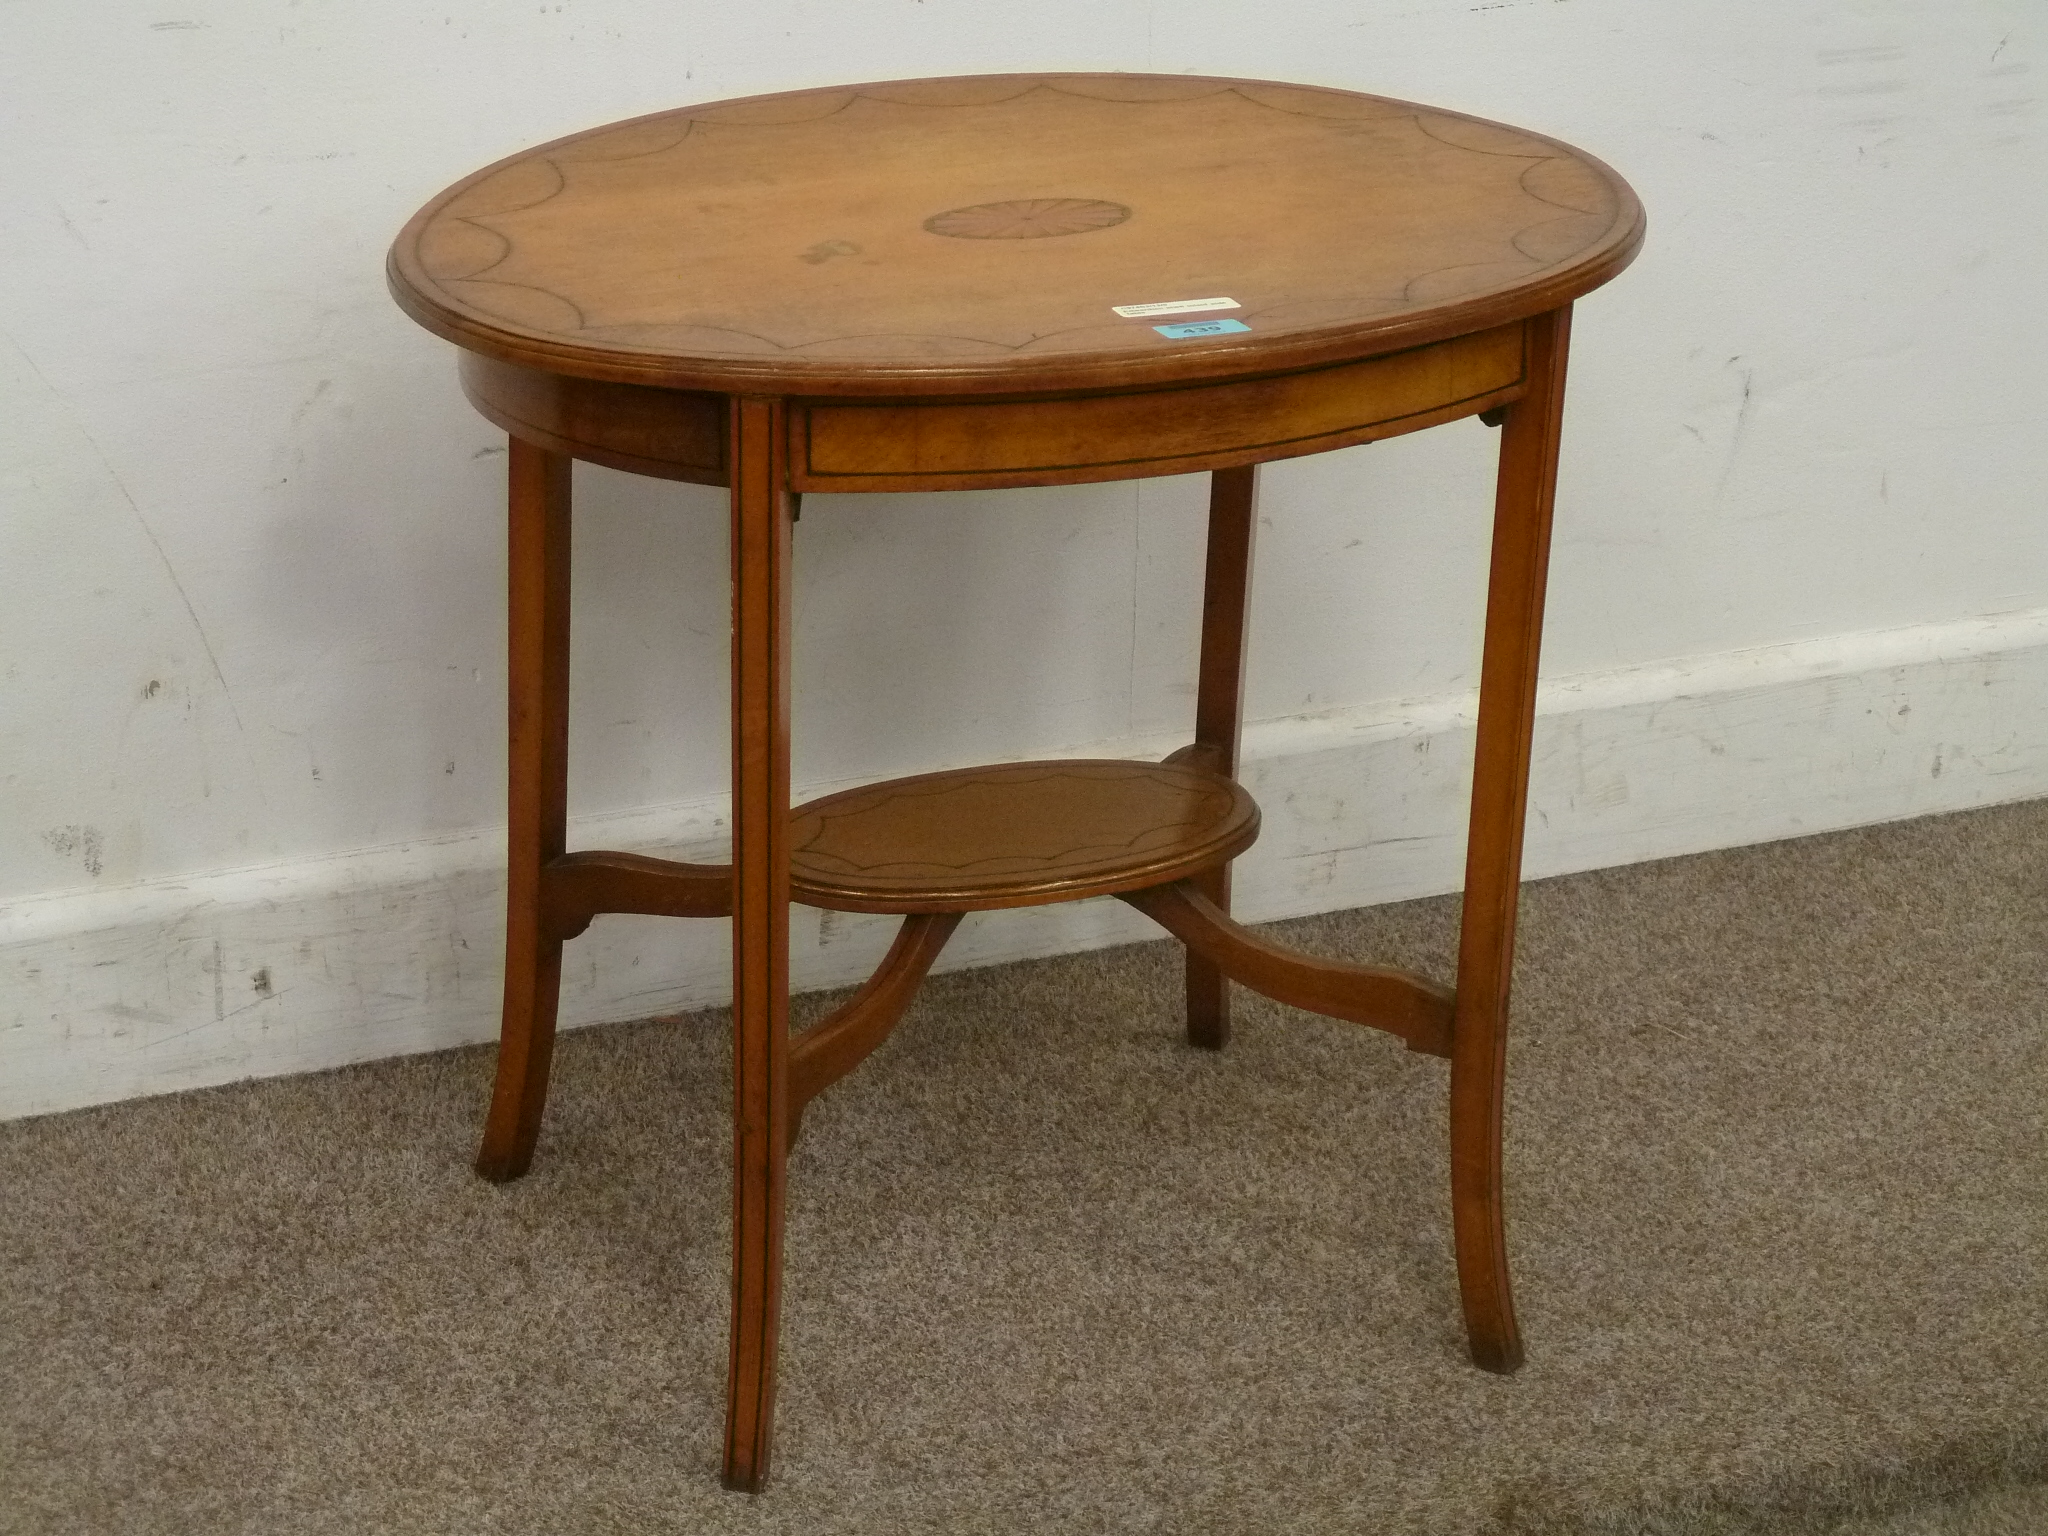 Edwardian satinwood occasional table inlaid with shell motif, H54cm